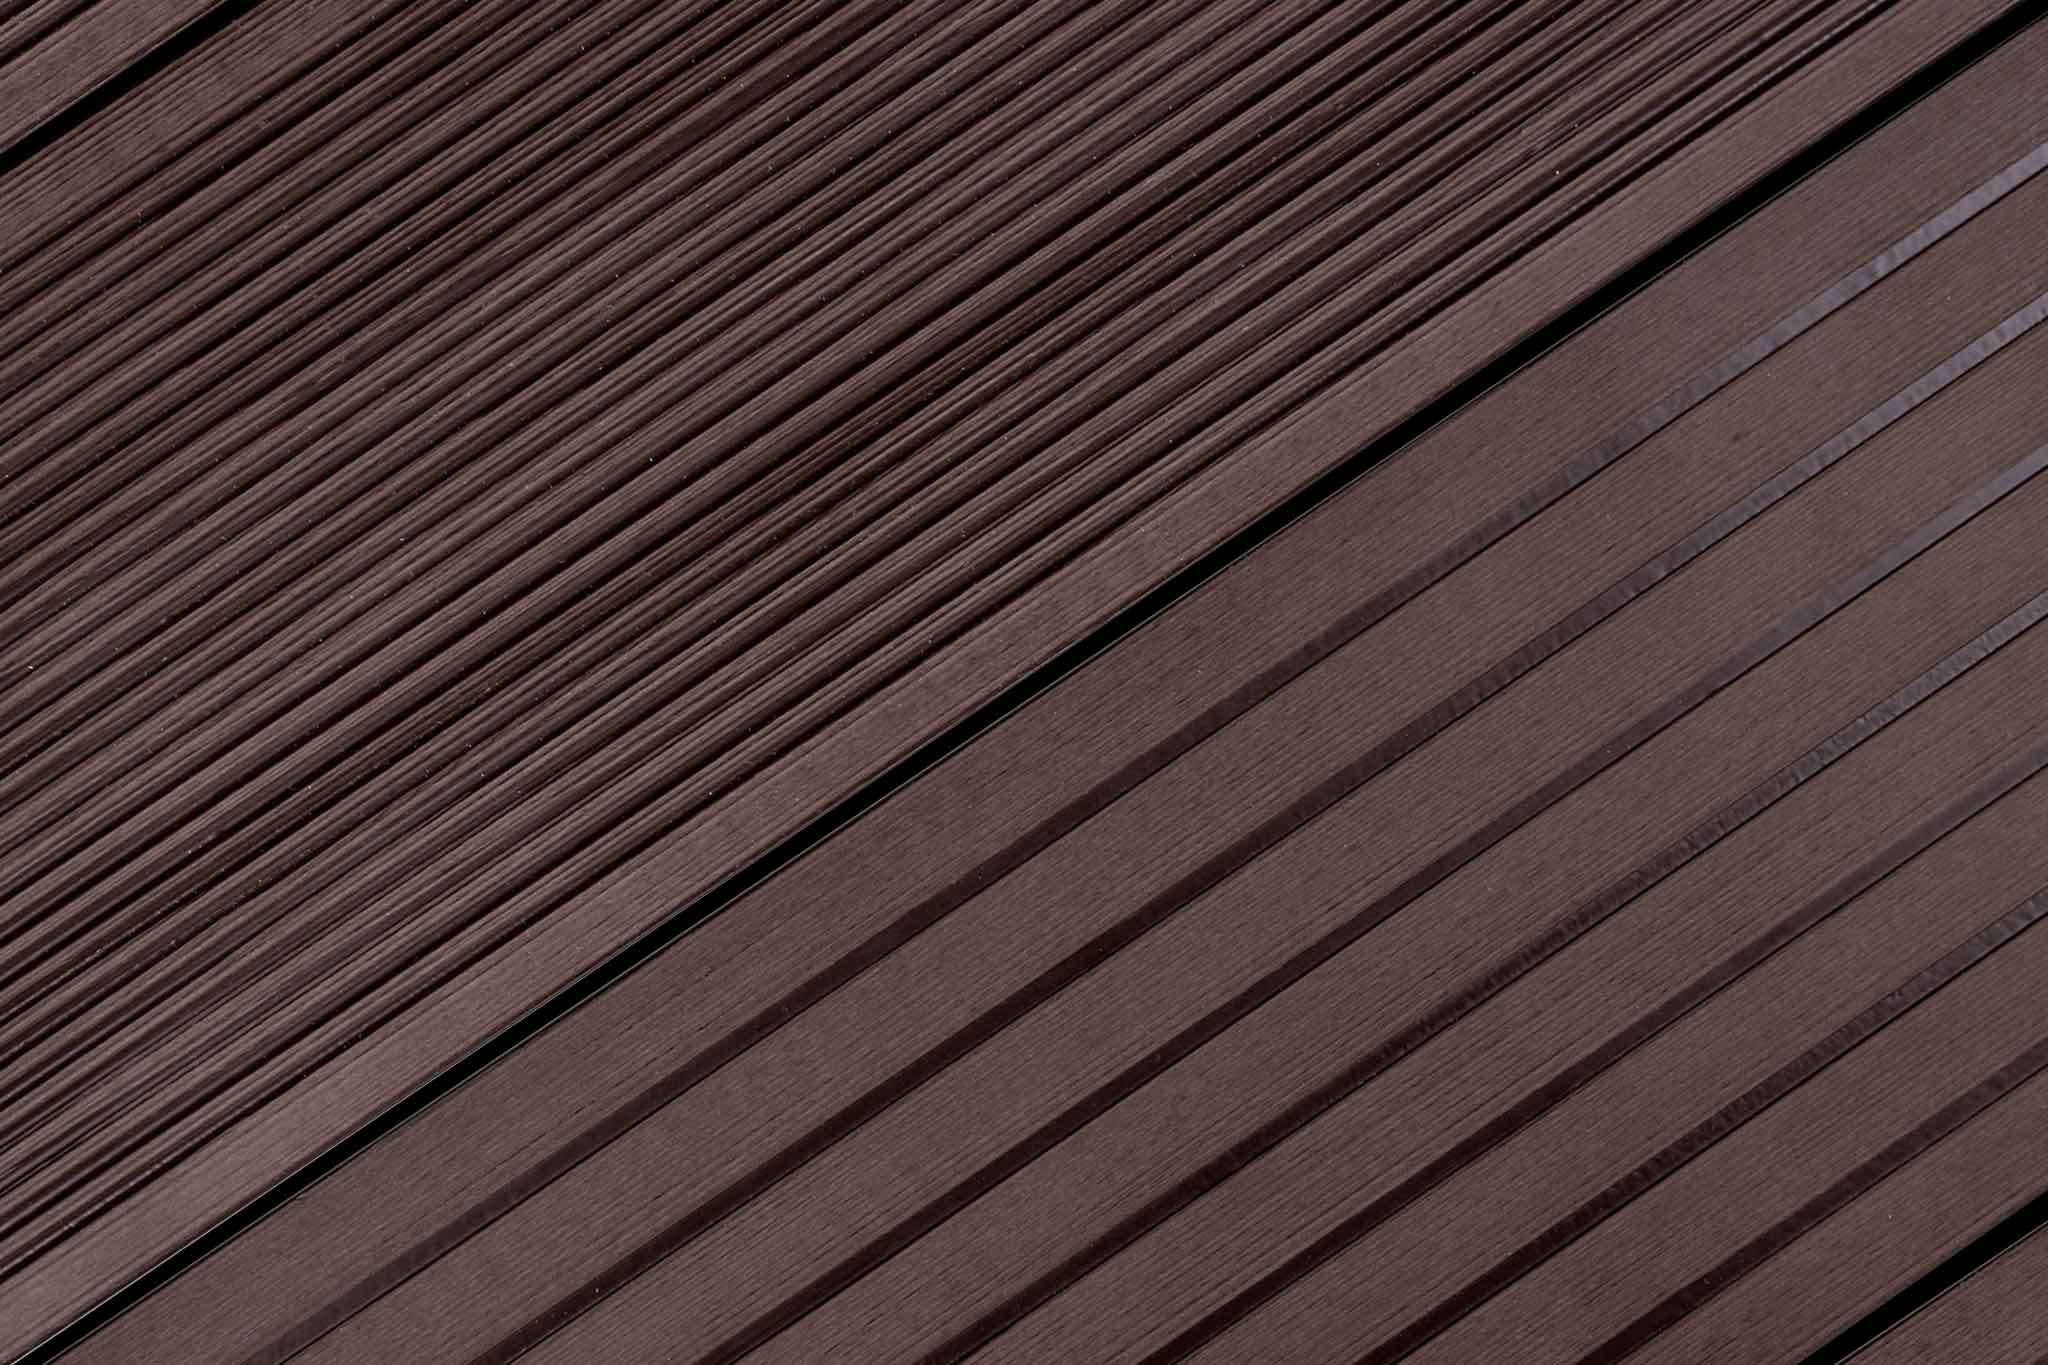 NaturaPlus™ | Dark Brown Grooved Composite Decking Board (3m length)